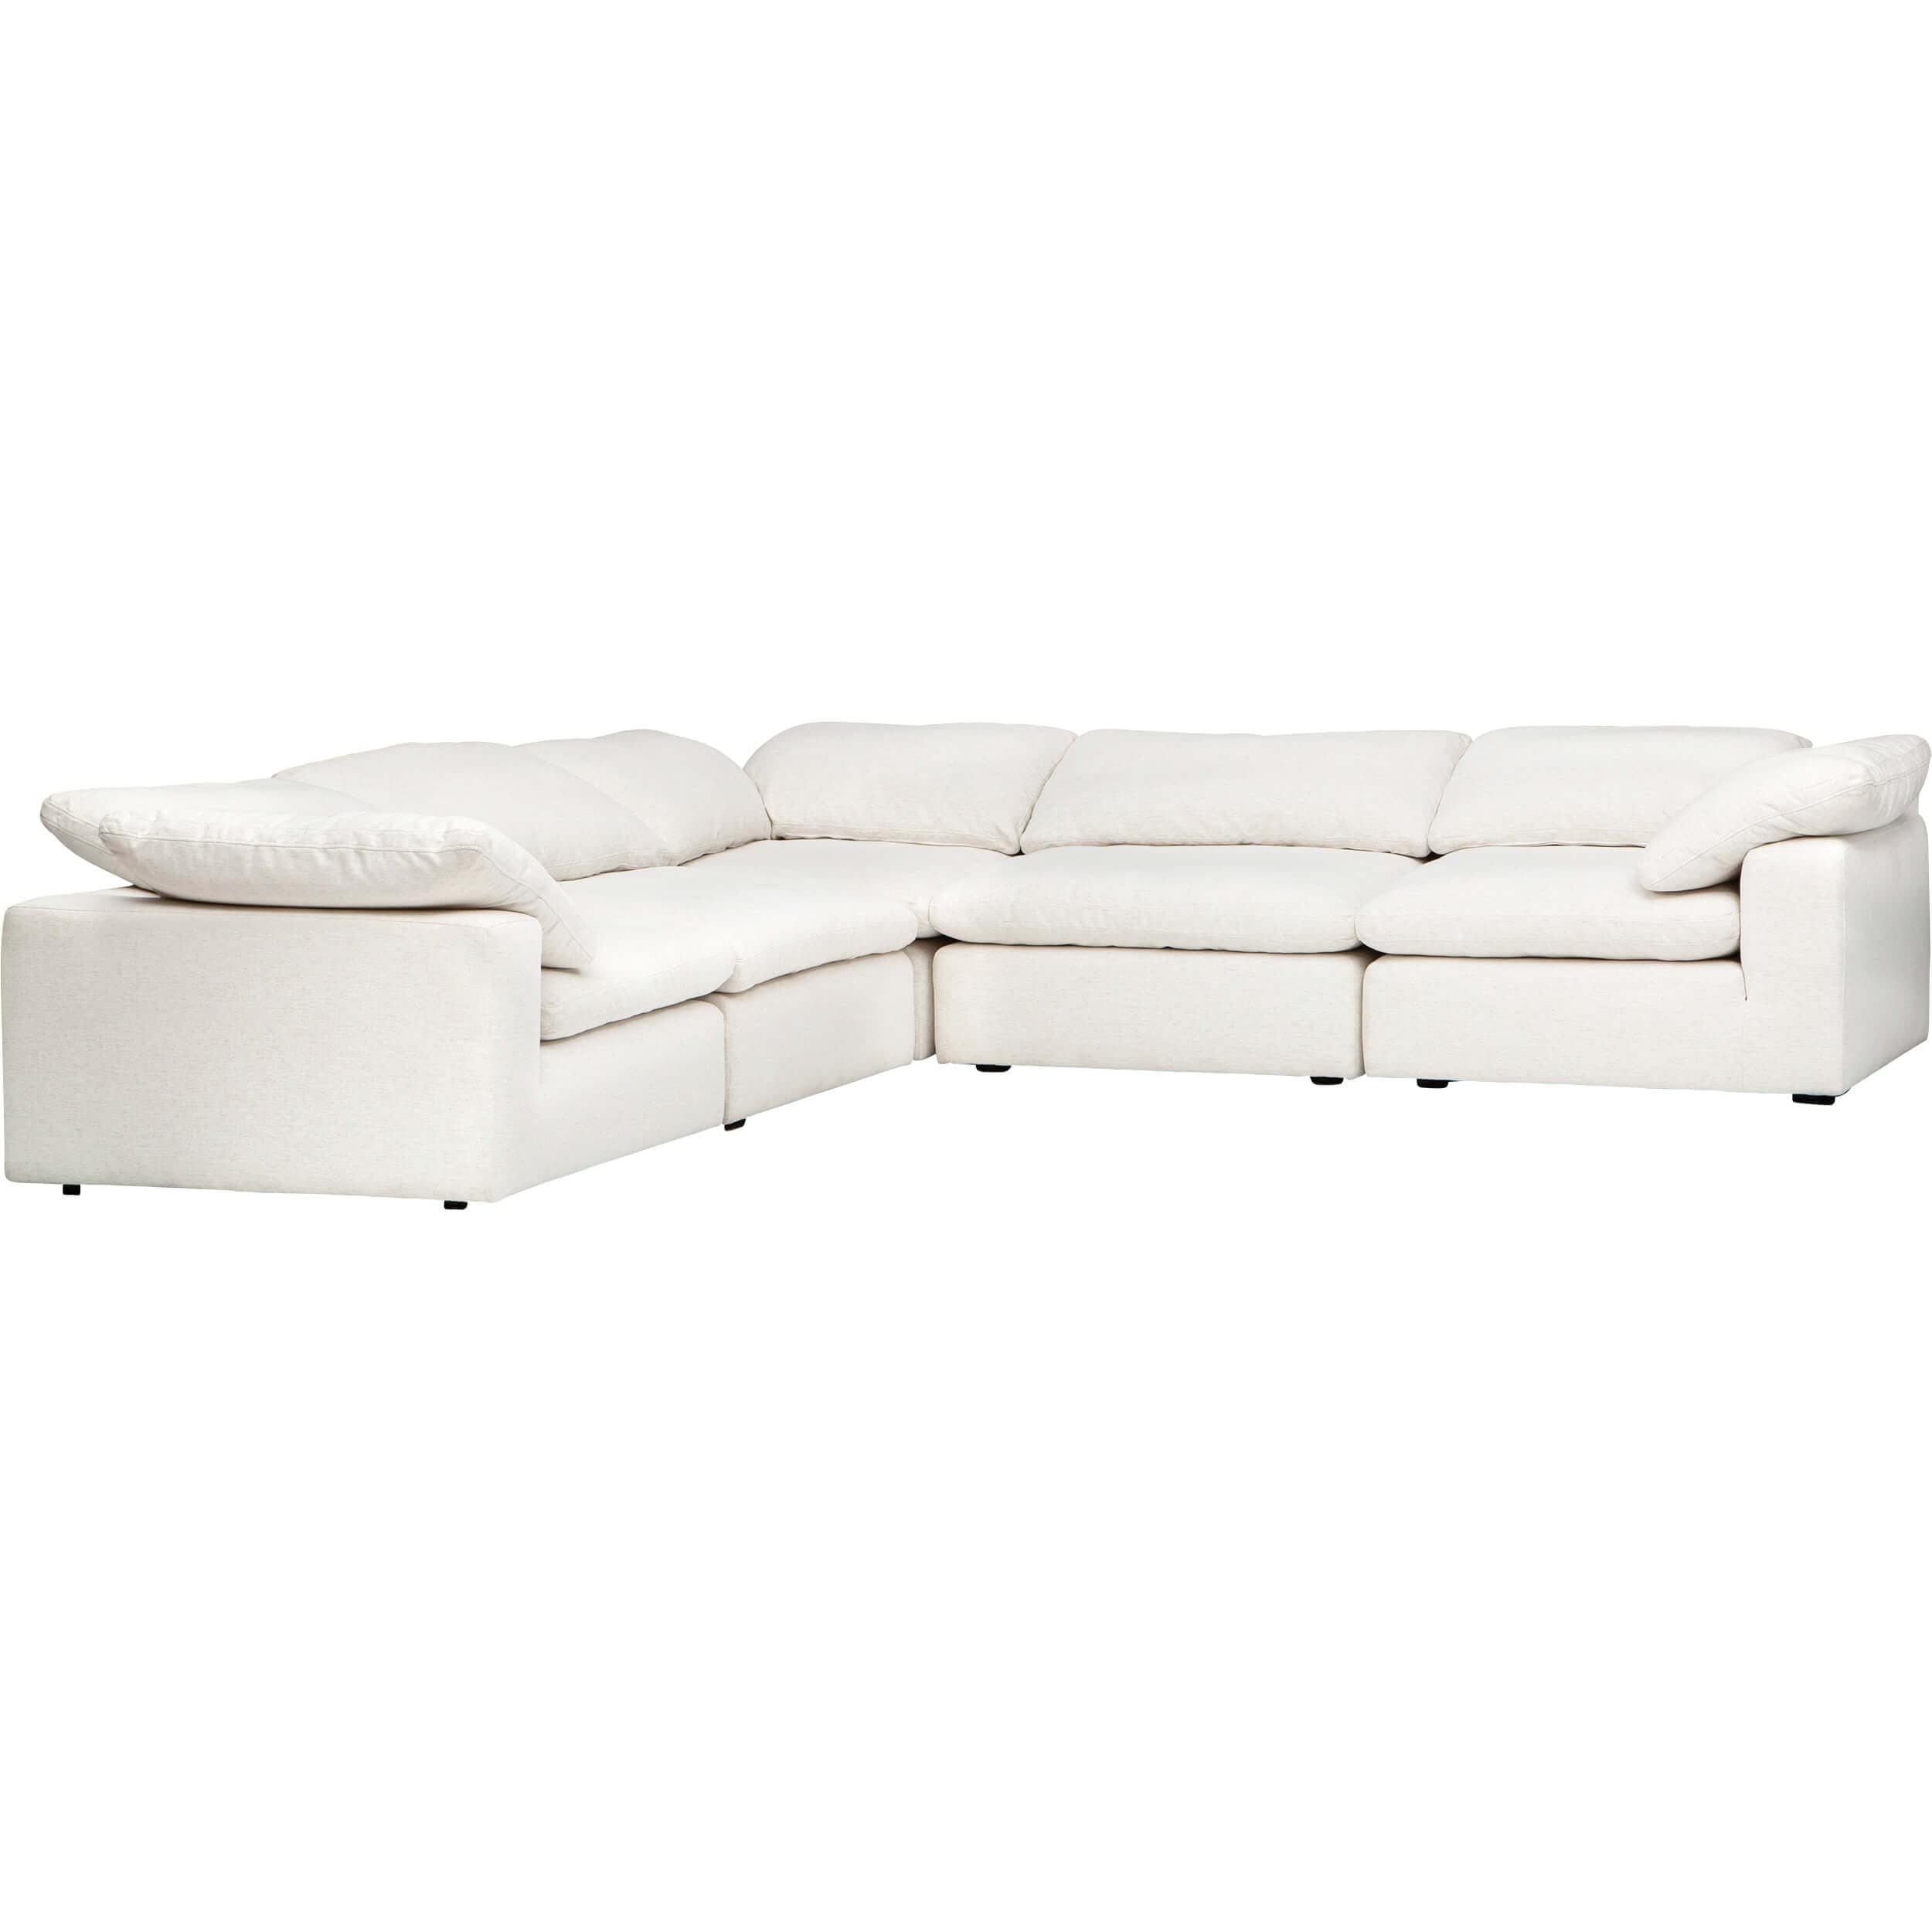 Image of Mateo 5 Piece Modular Sectional, Nomad Snow